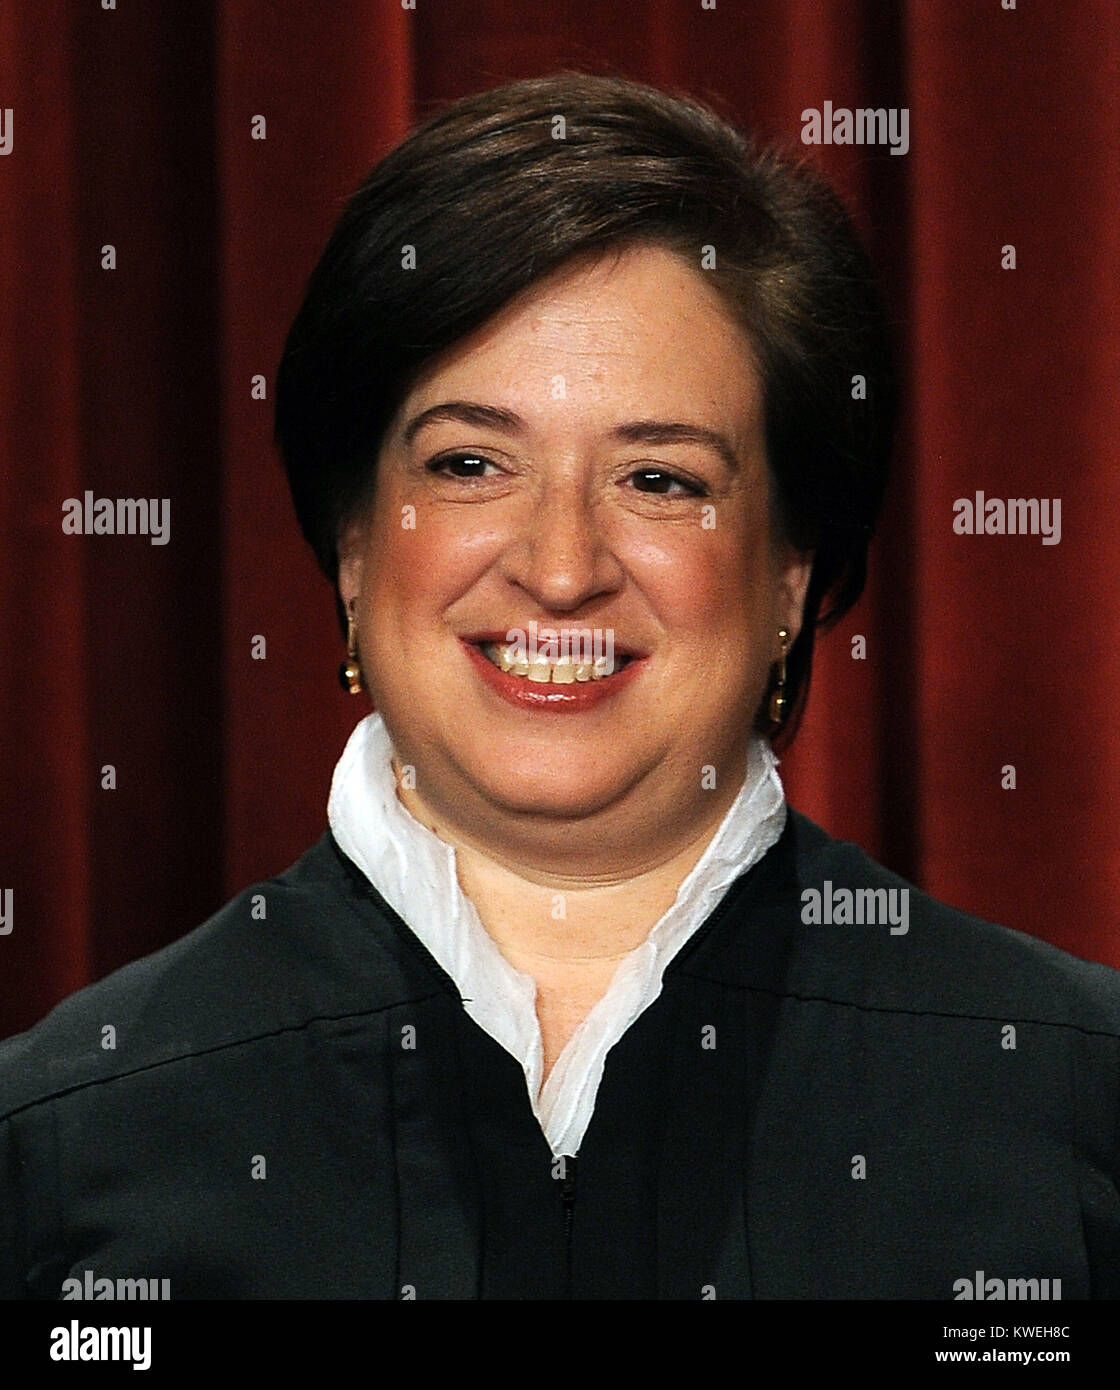 Associate Justice Elena Kagan, the newest member of the Court, and the Supreme Court Justices of the United States sit for a formal group photo in the East Conference Room of the Supreme Court in Washington on Friday, October 8, 2010.    .Credit: Roger L. Wollenberg - Pool via CNP /MediaPunch Stock Photo